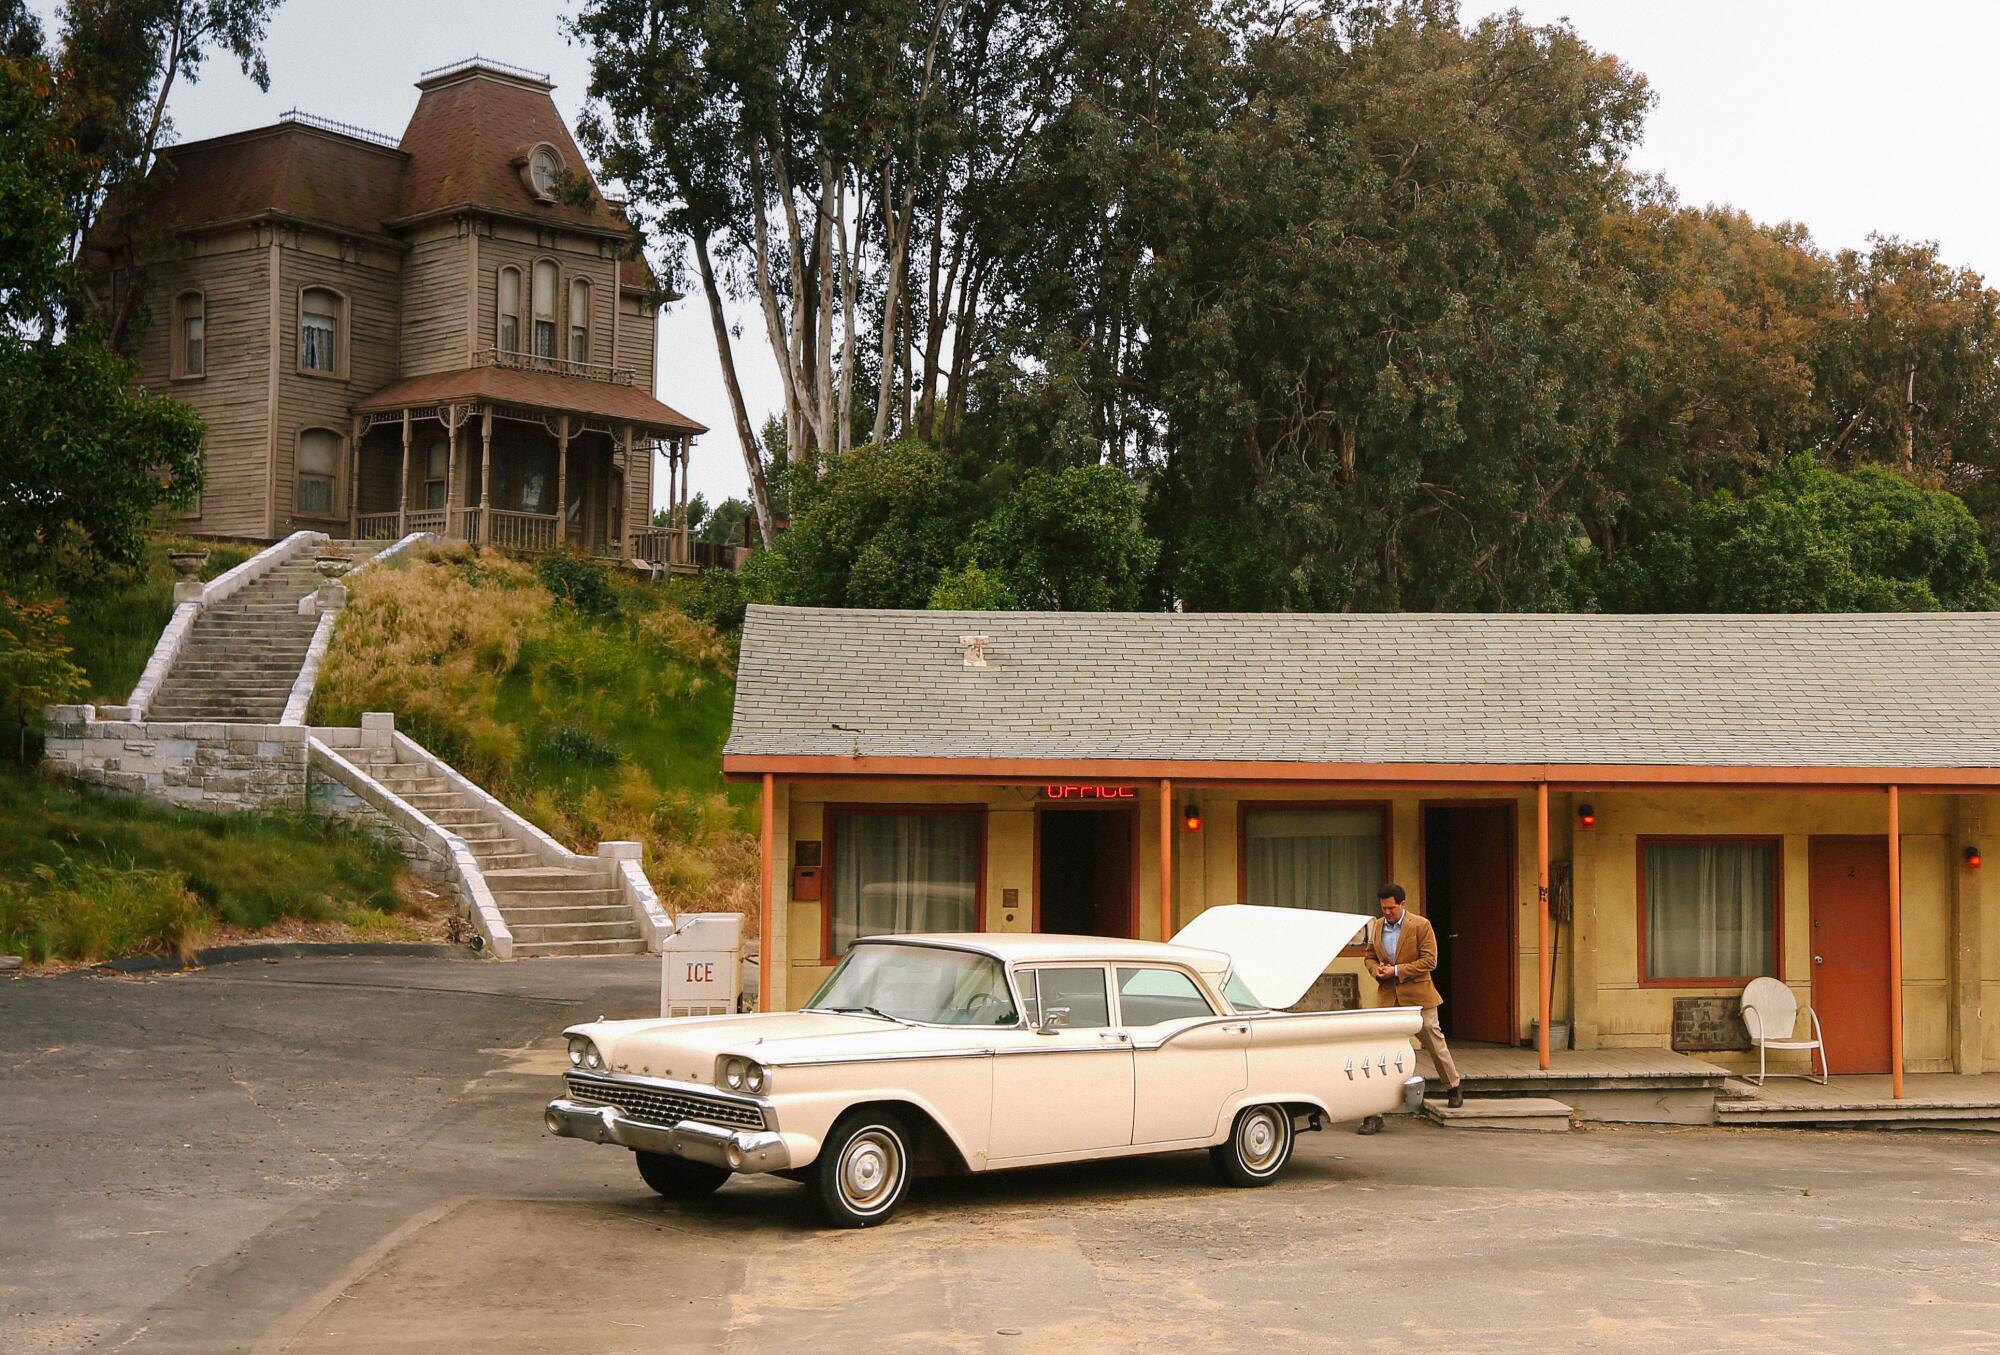 A low-slung motel below a Gothic residence.